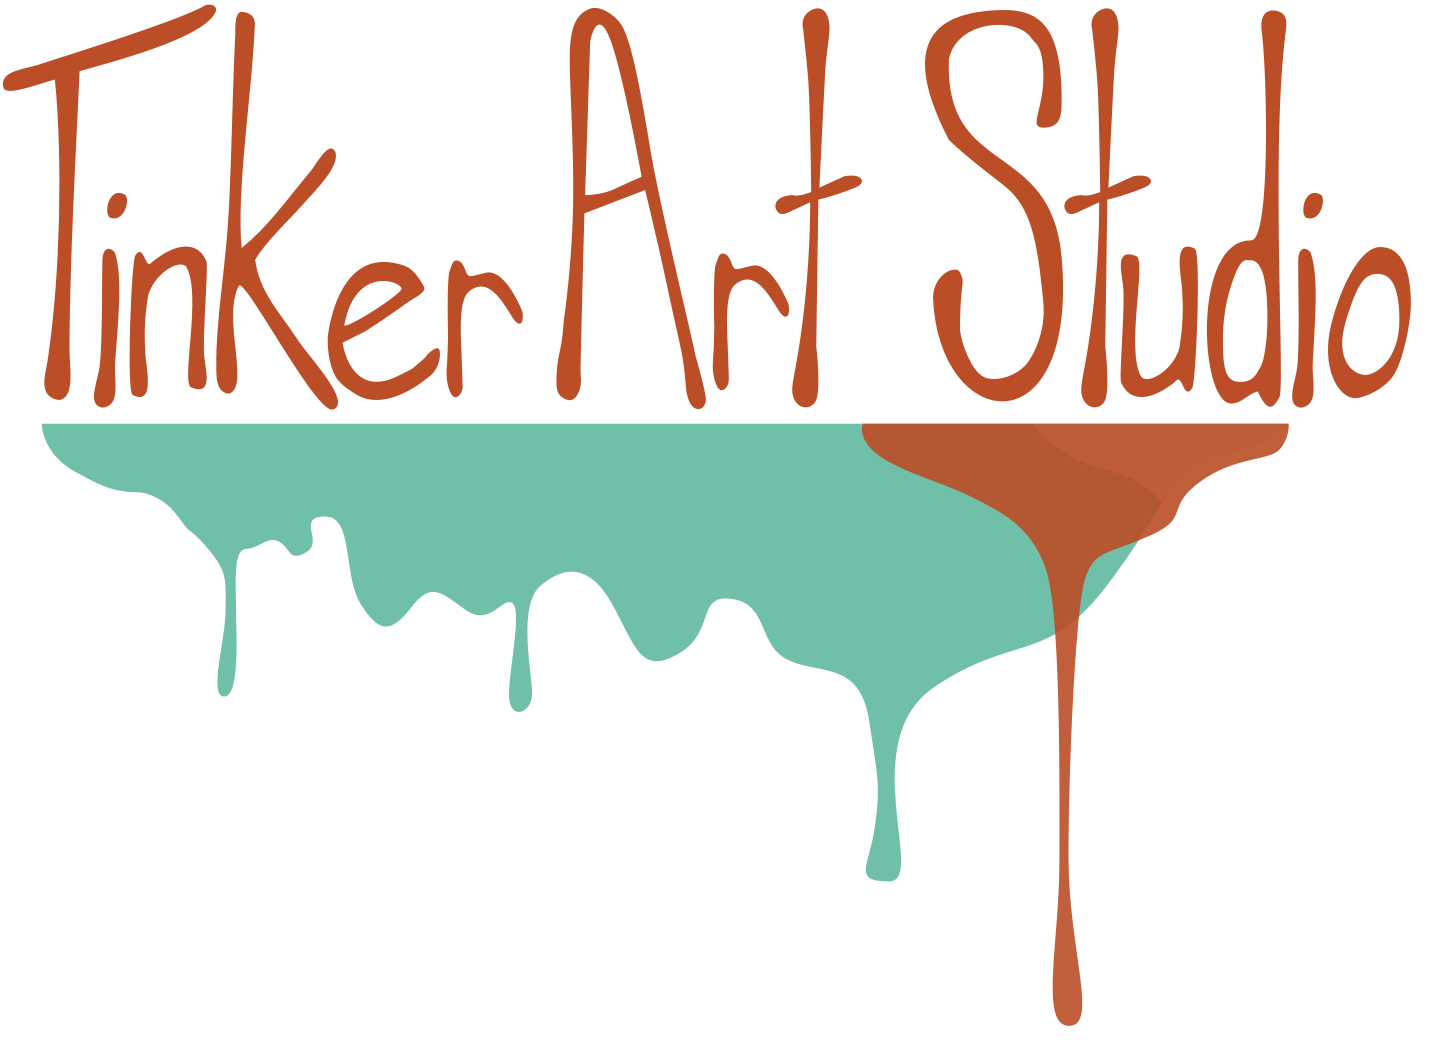 Children's Art Studio Tinker and Nudge Comes to Uptown - Mpls.St